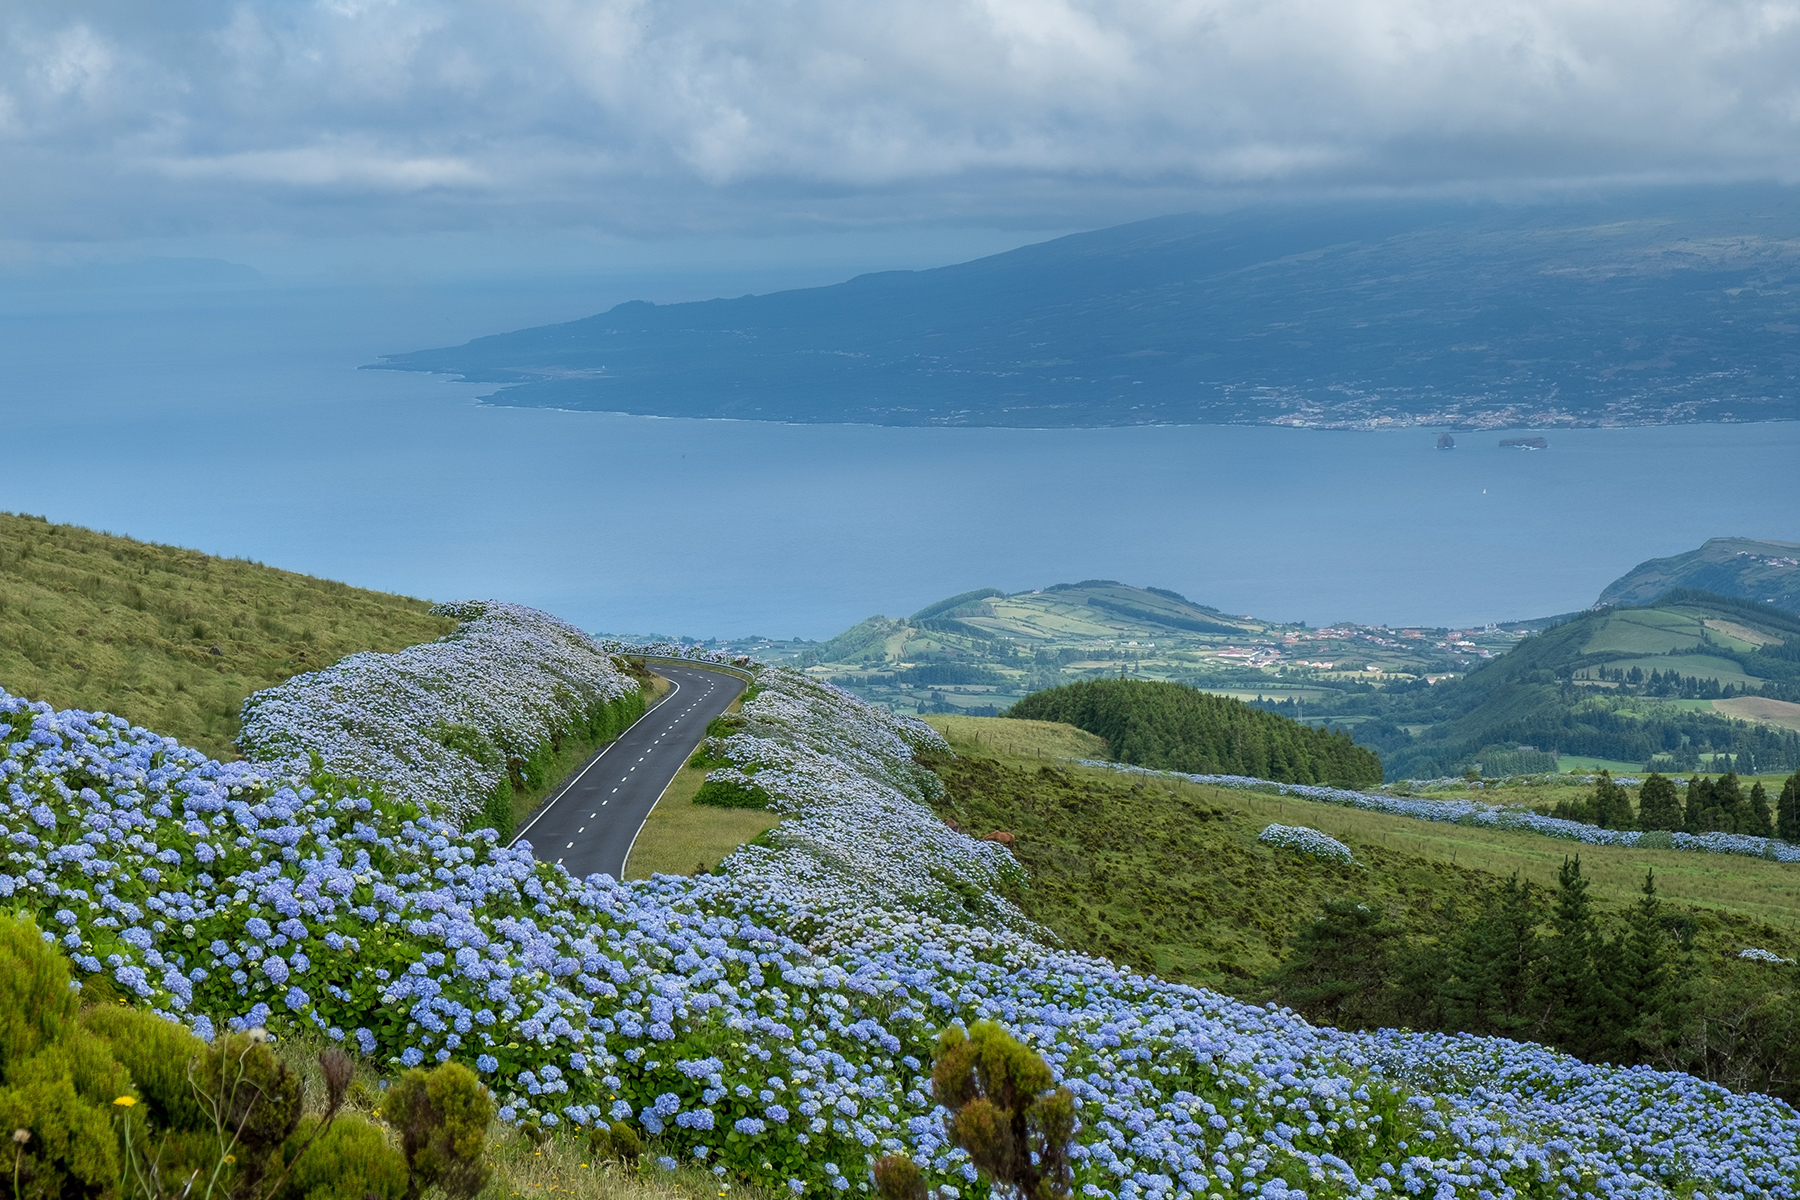 Faial Island in the Azores